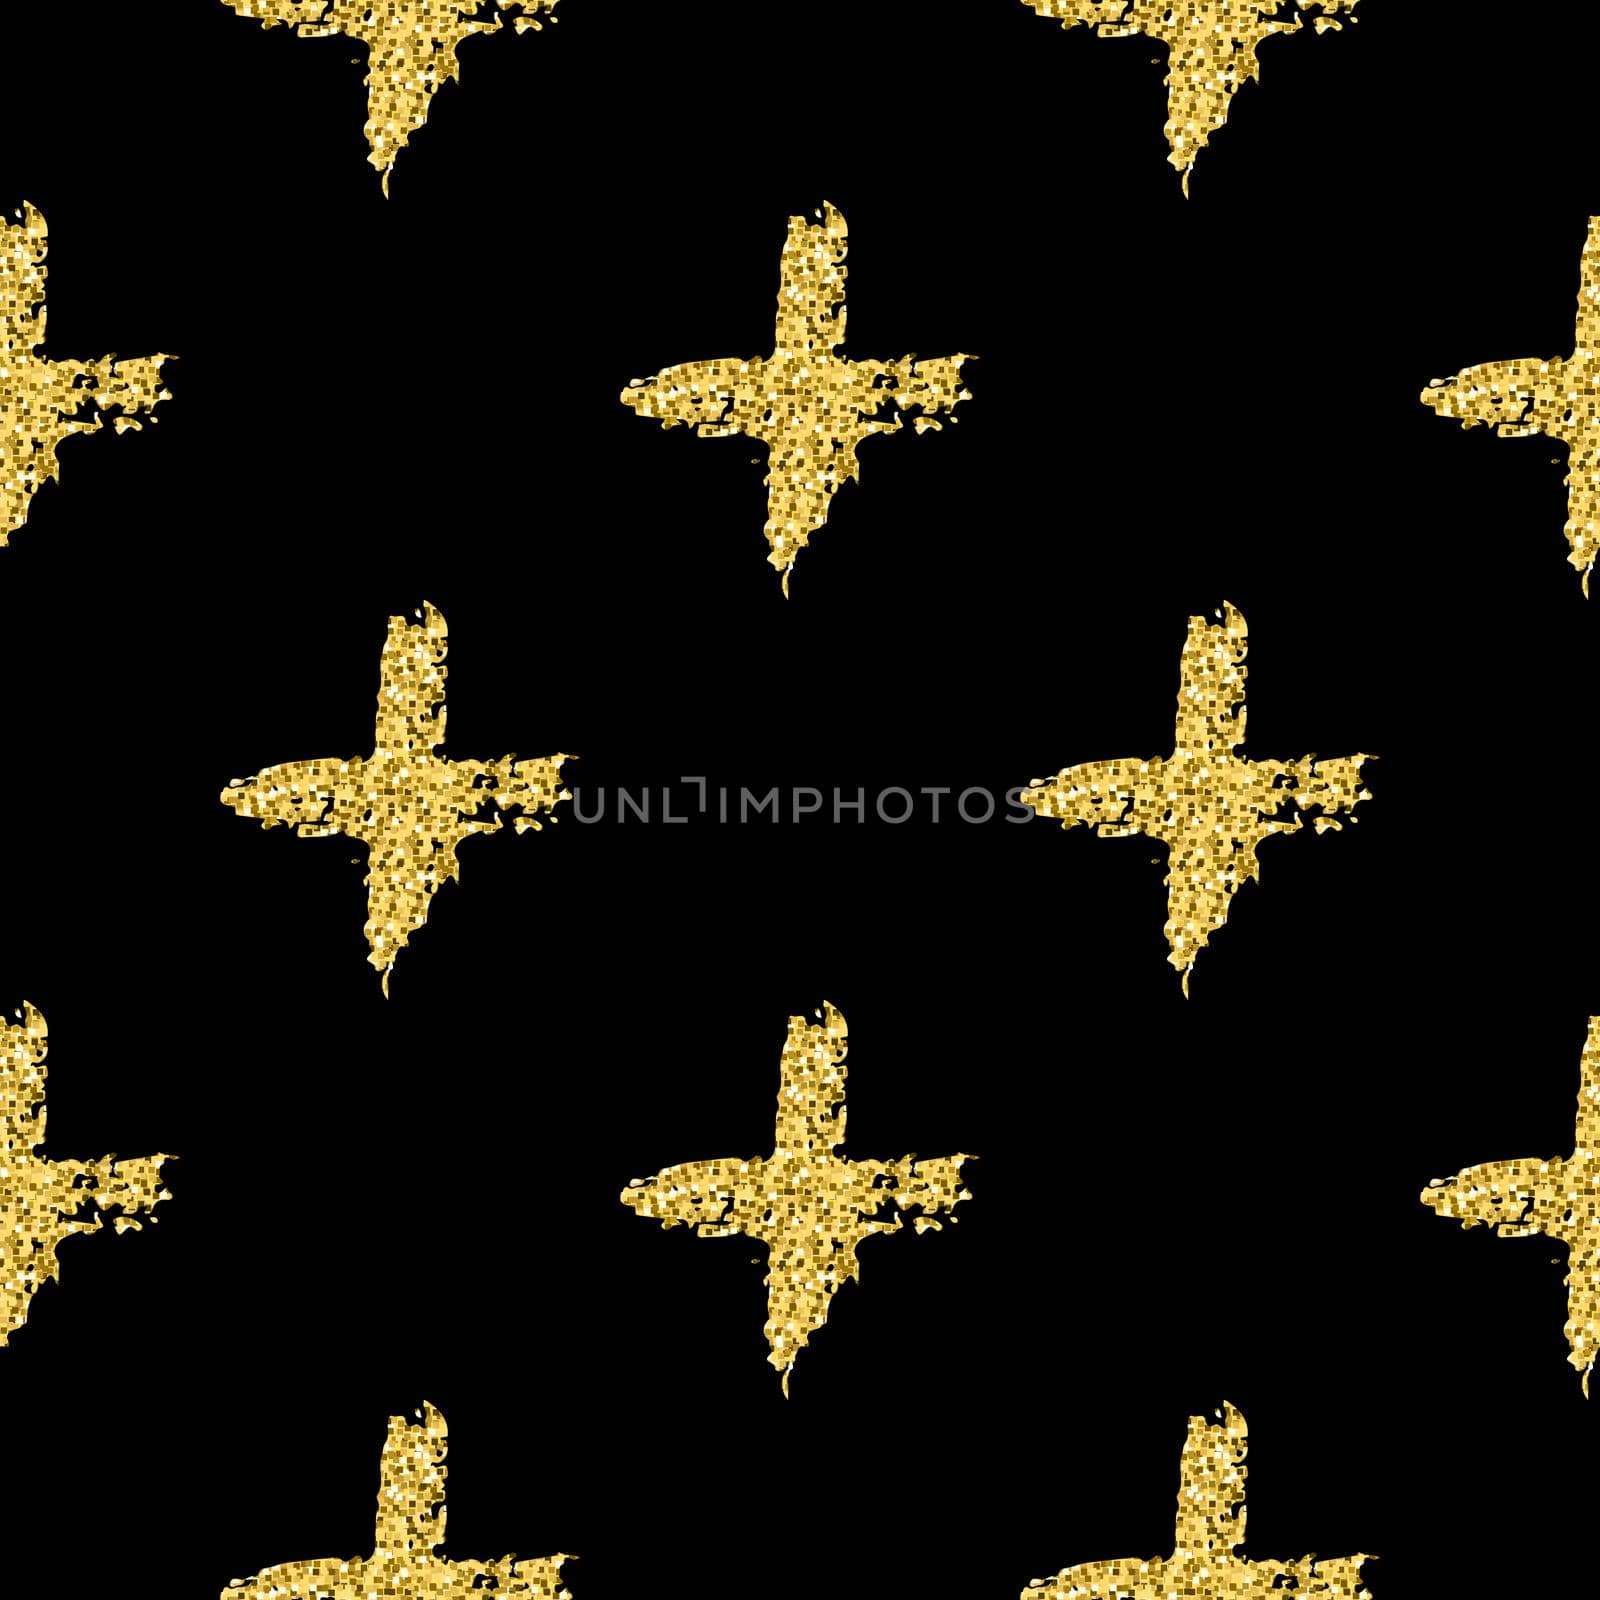 Modern seamless pattern with brush shiny cross. Gold metallic color on black background. Golden glitter texture. Ink geometric elements. Fashion catwalk style. Repeat fabric cloth print, textile.